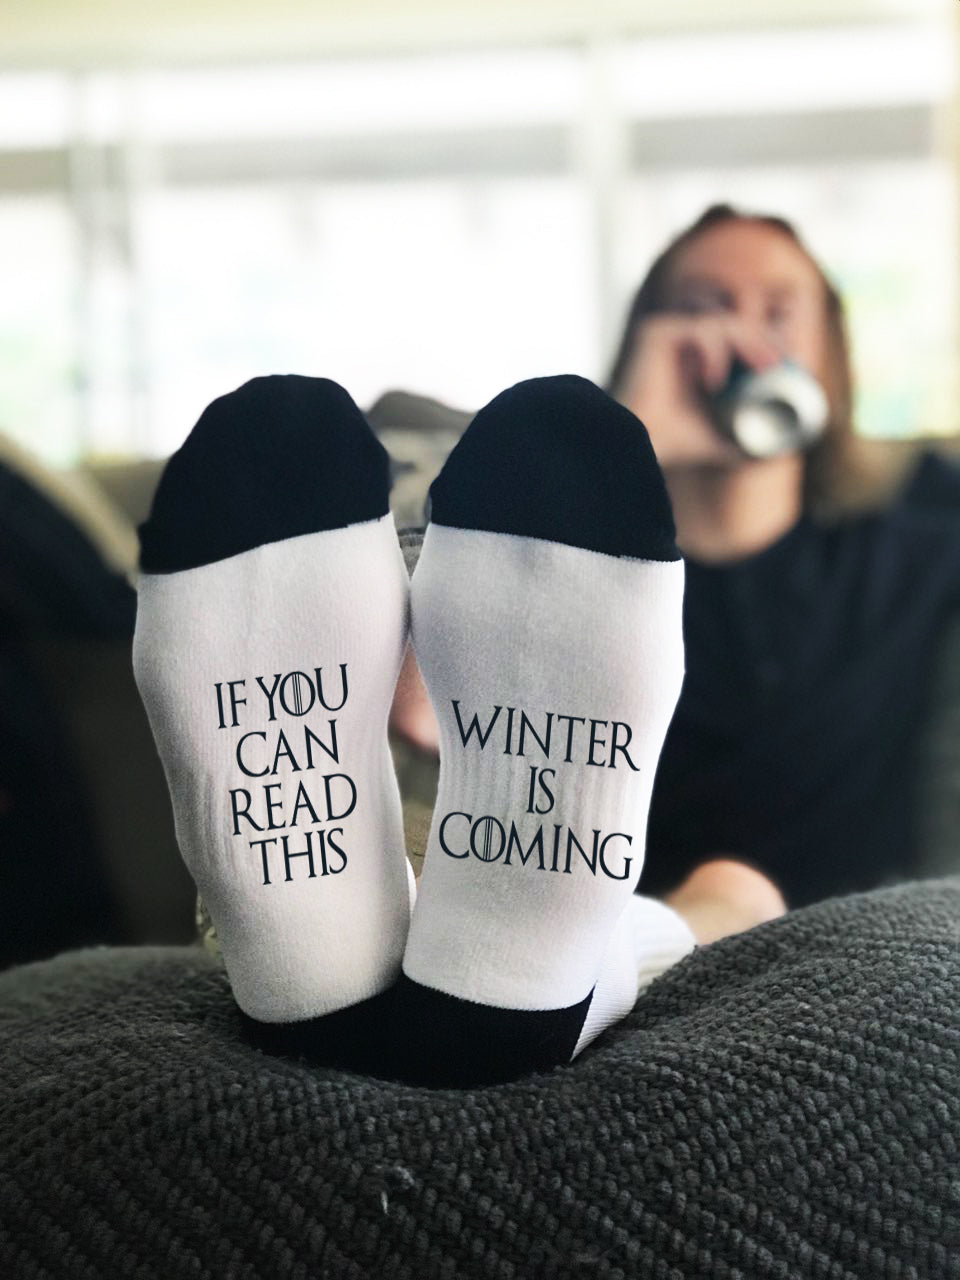 Game of Thrones Socks, Funny socks, If you can read this Winter is